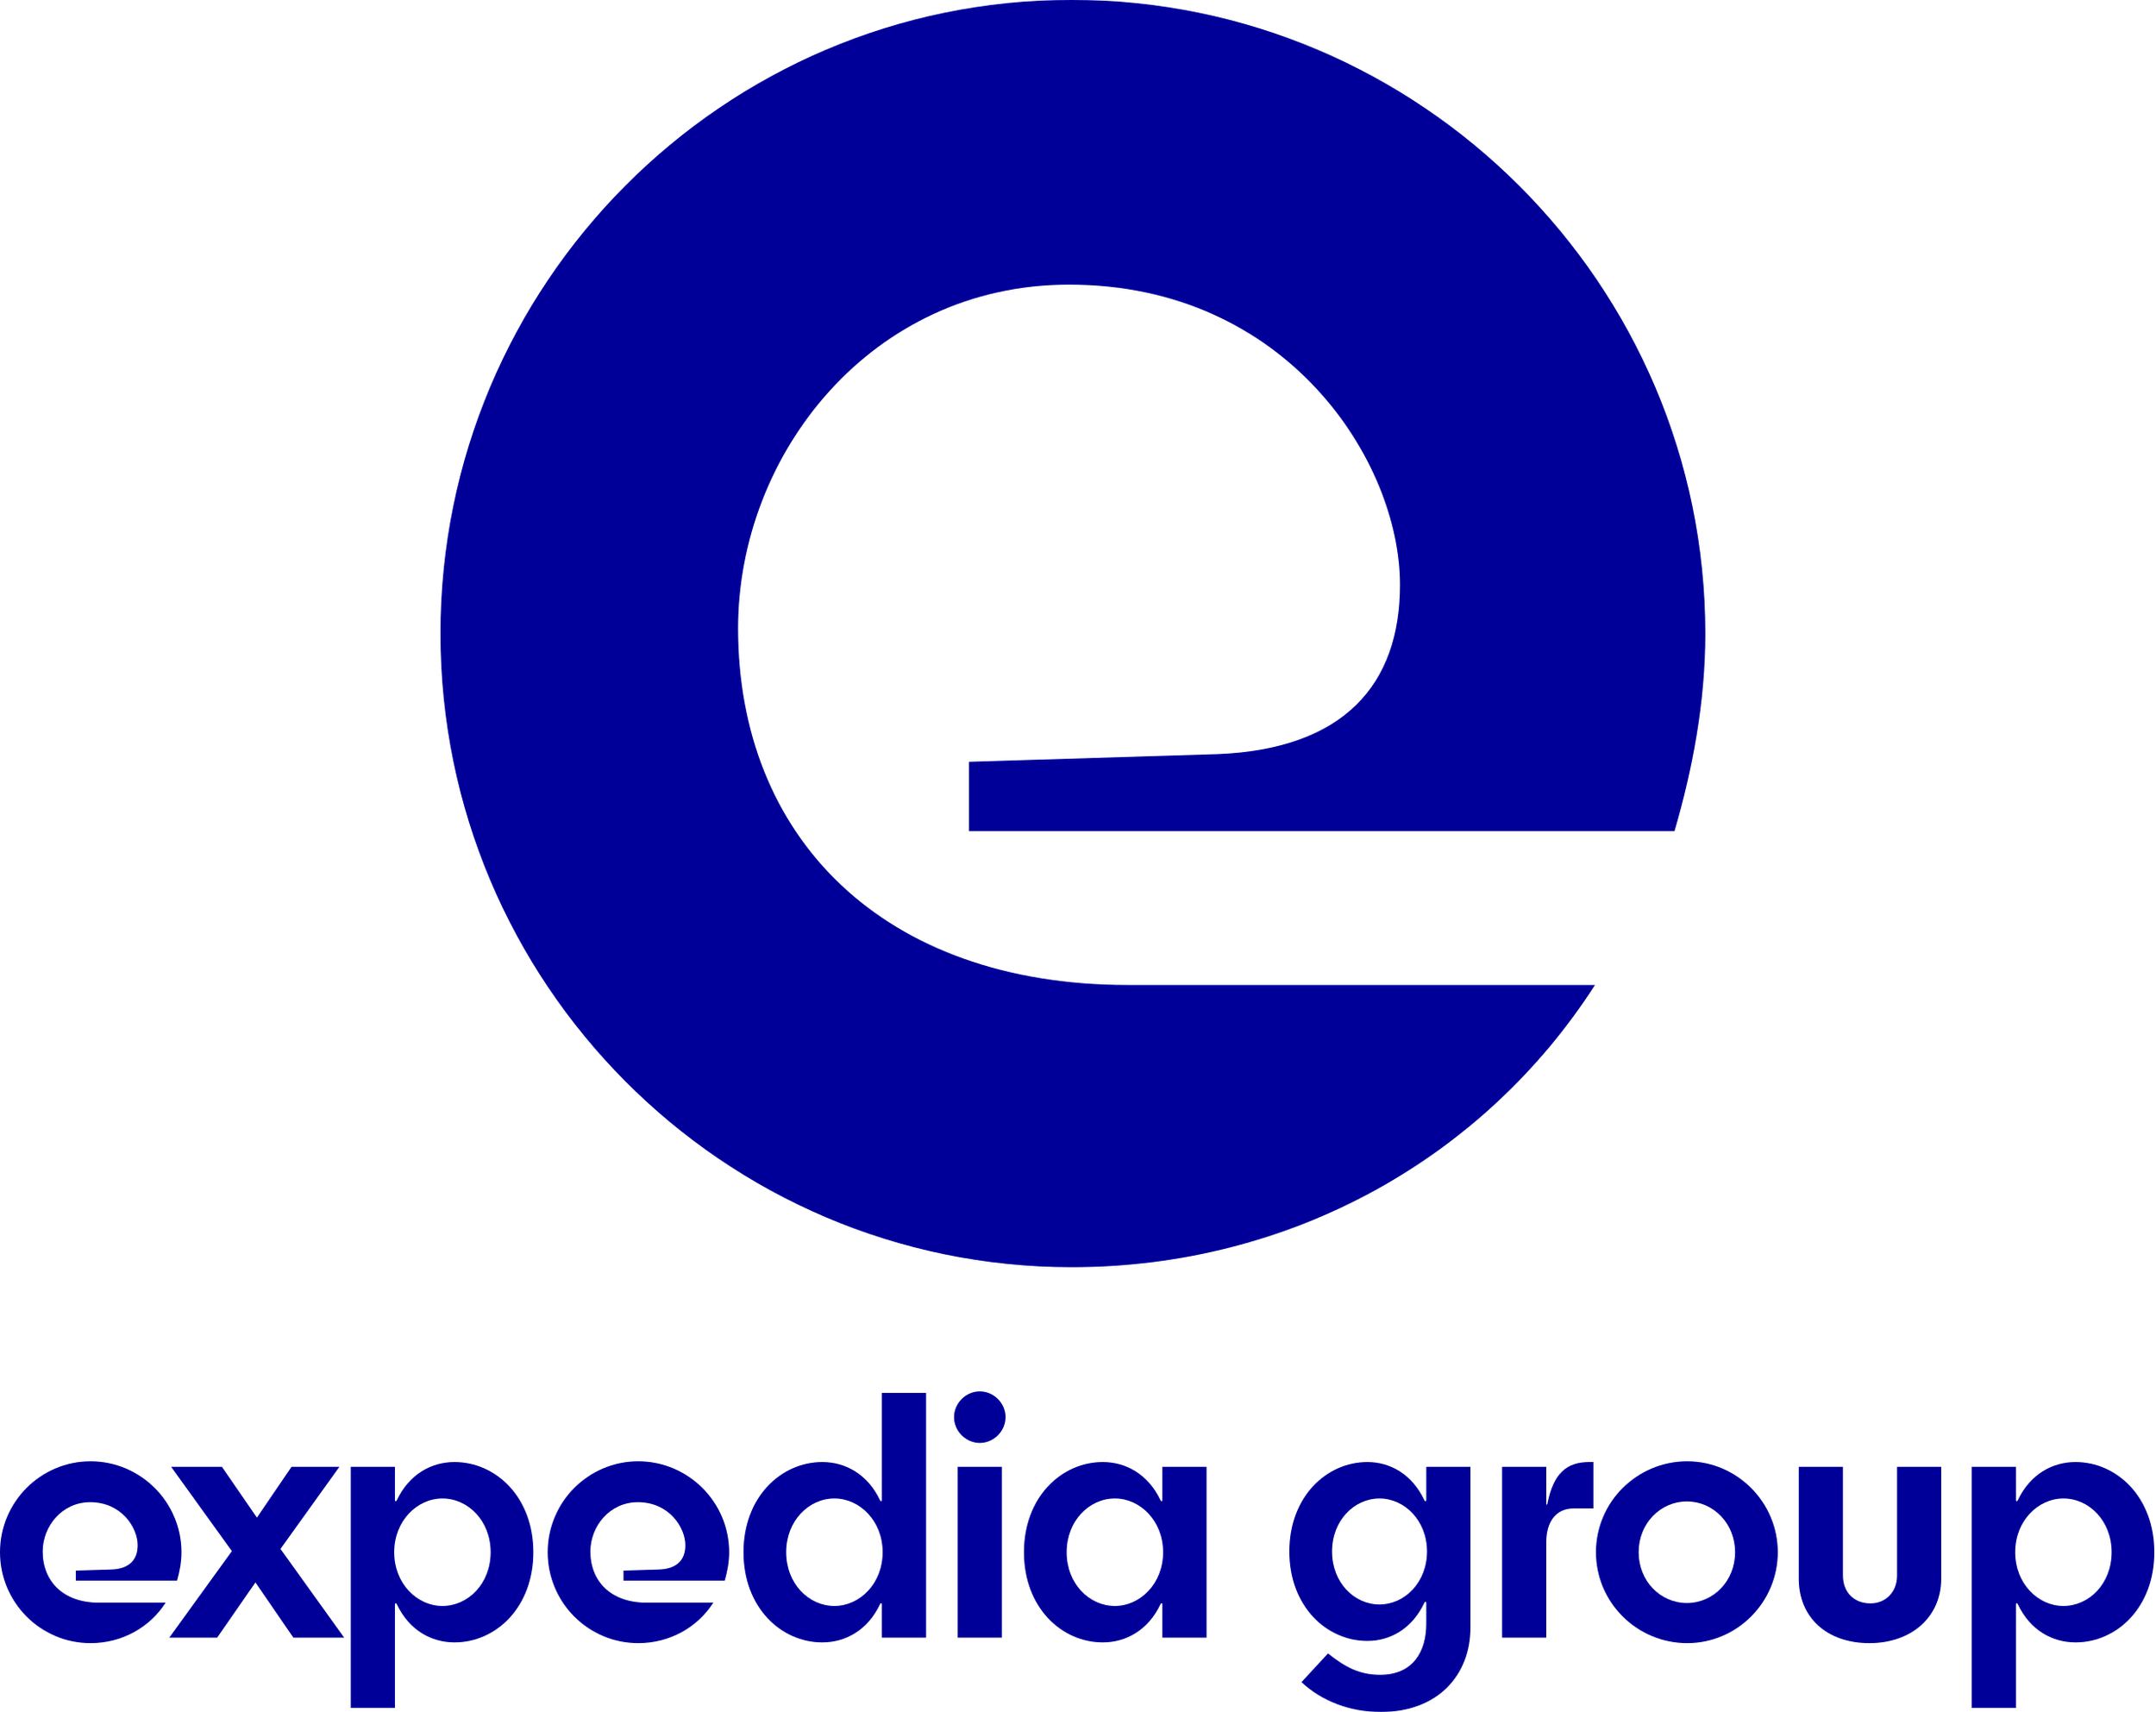 Expedia_Group_logo.svg.png